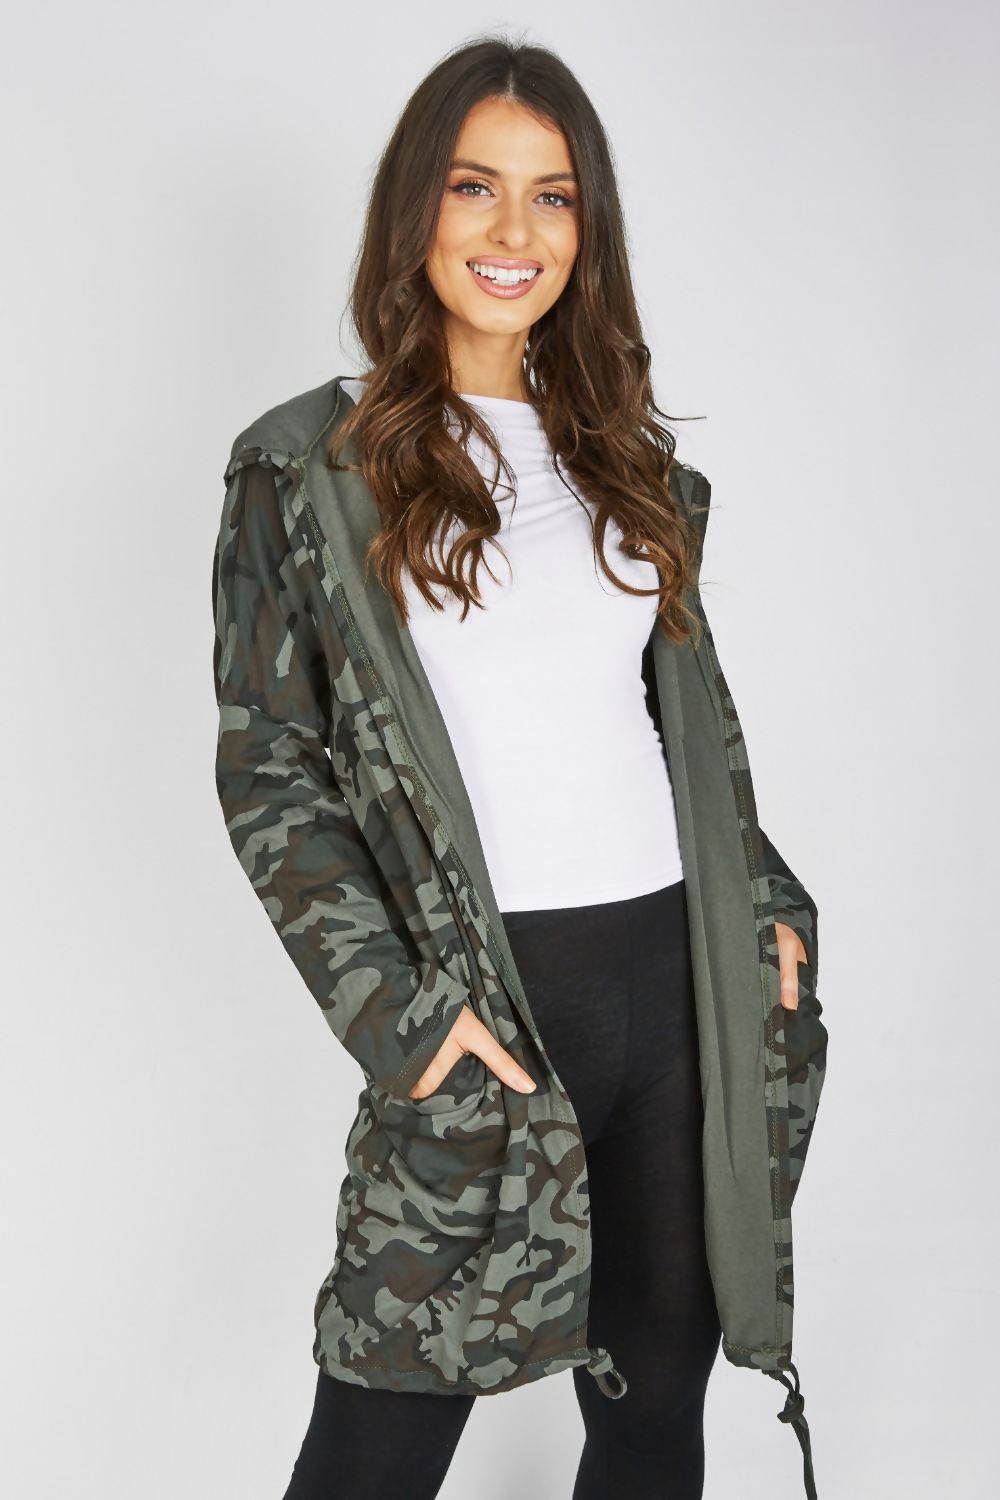 Camo Sequin Rock and Roll Jacket